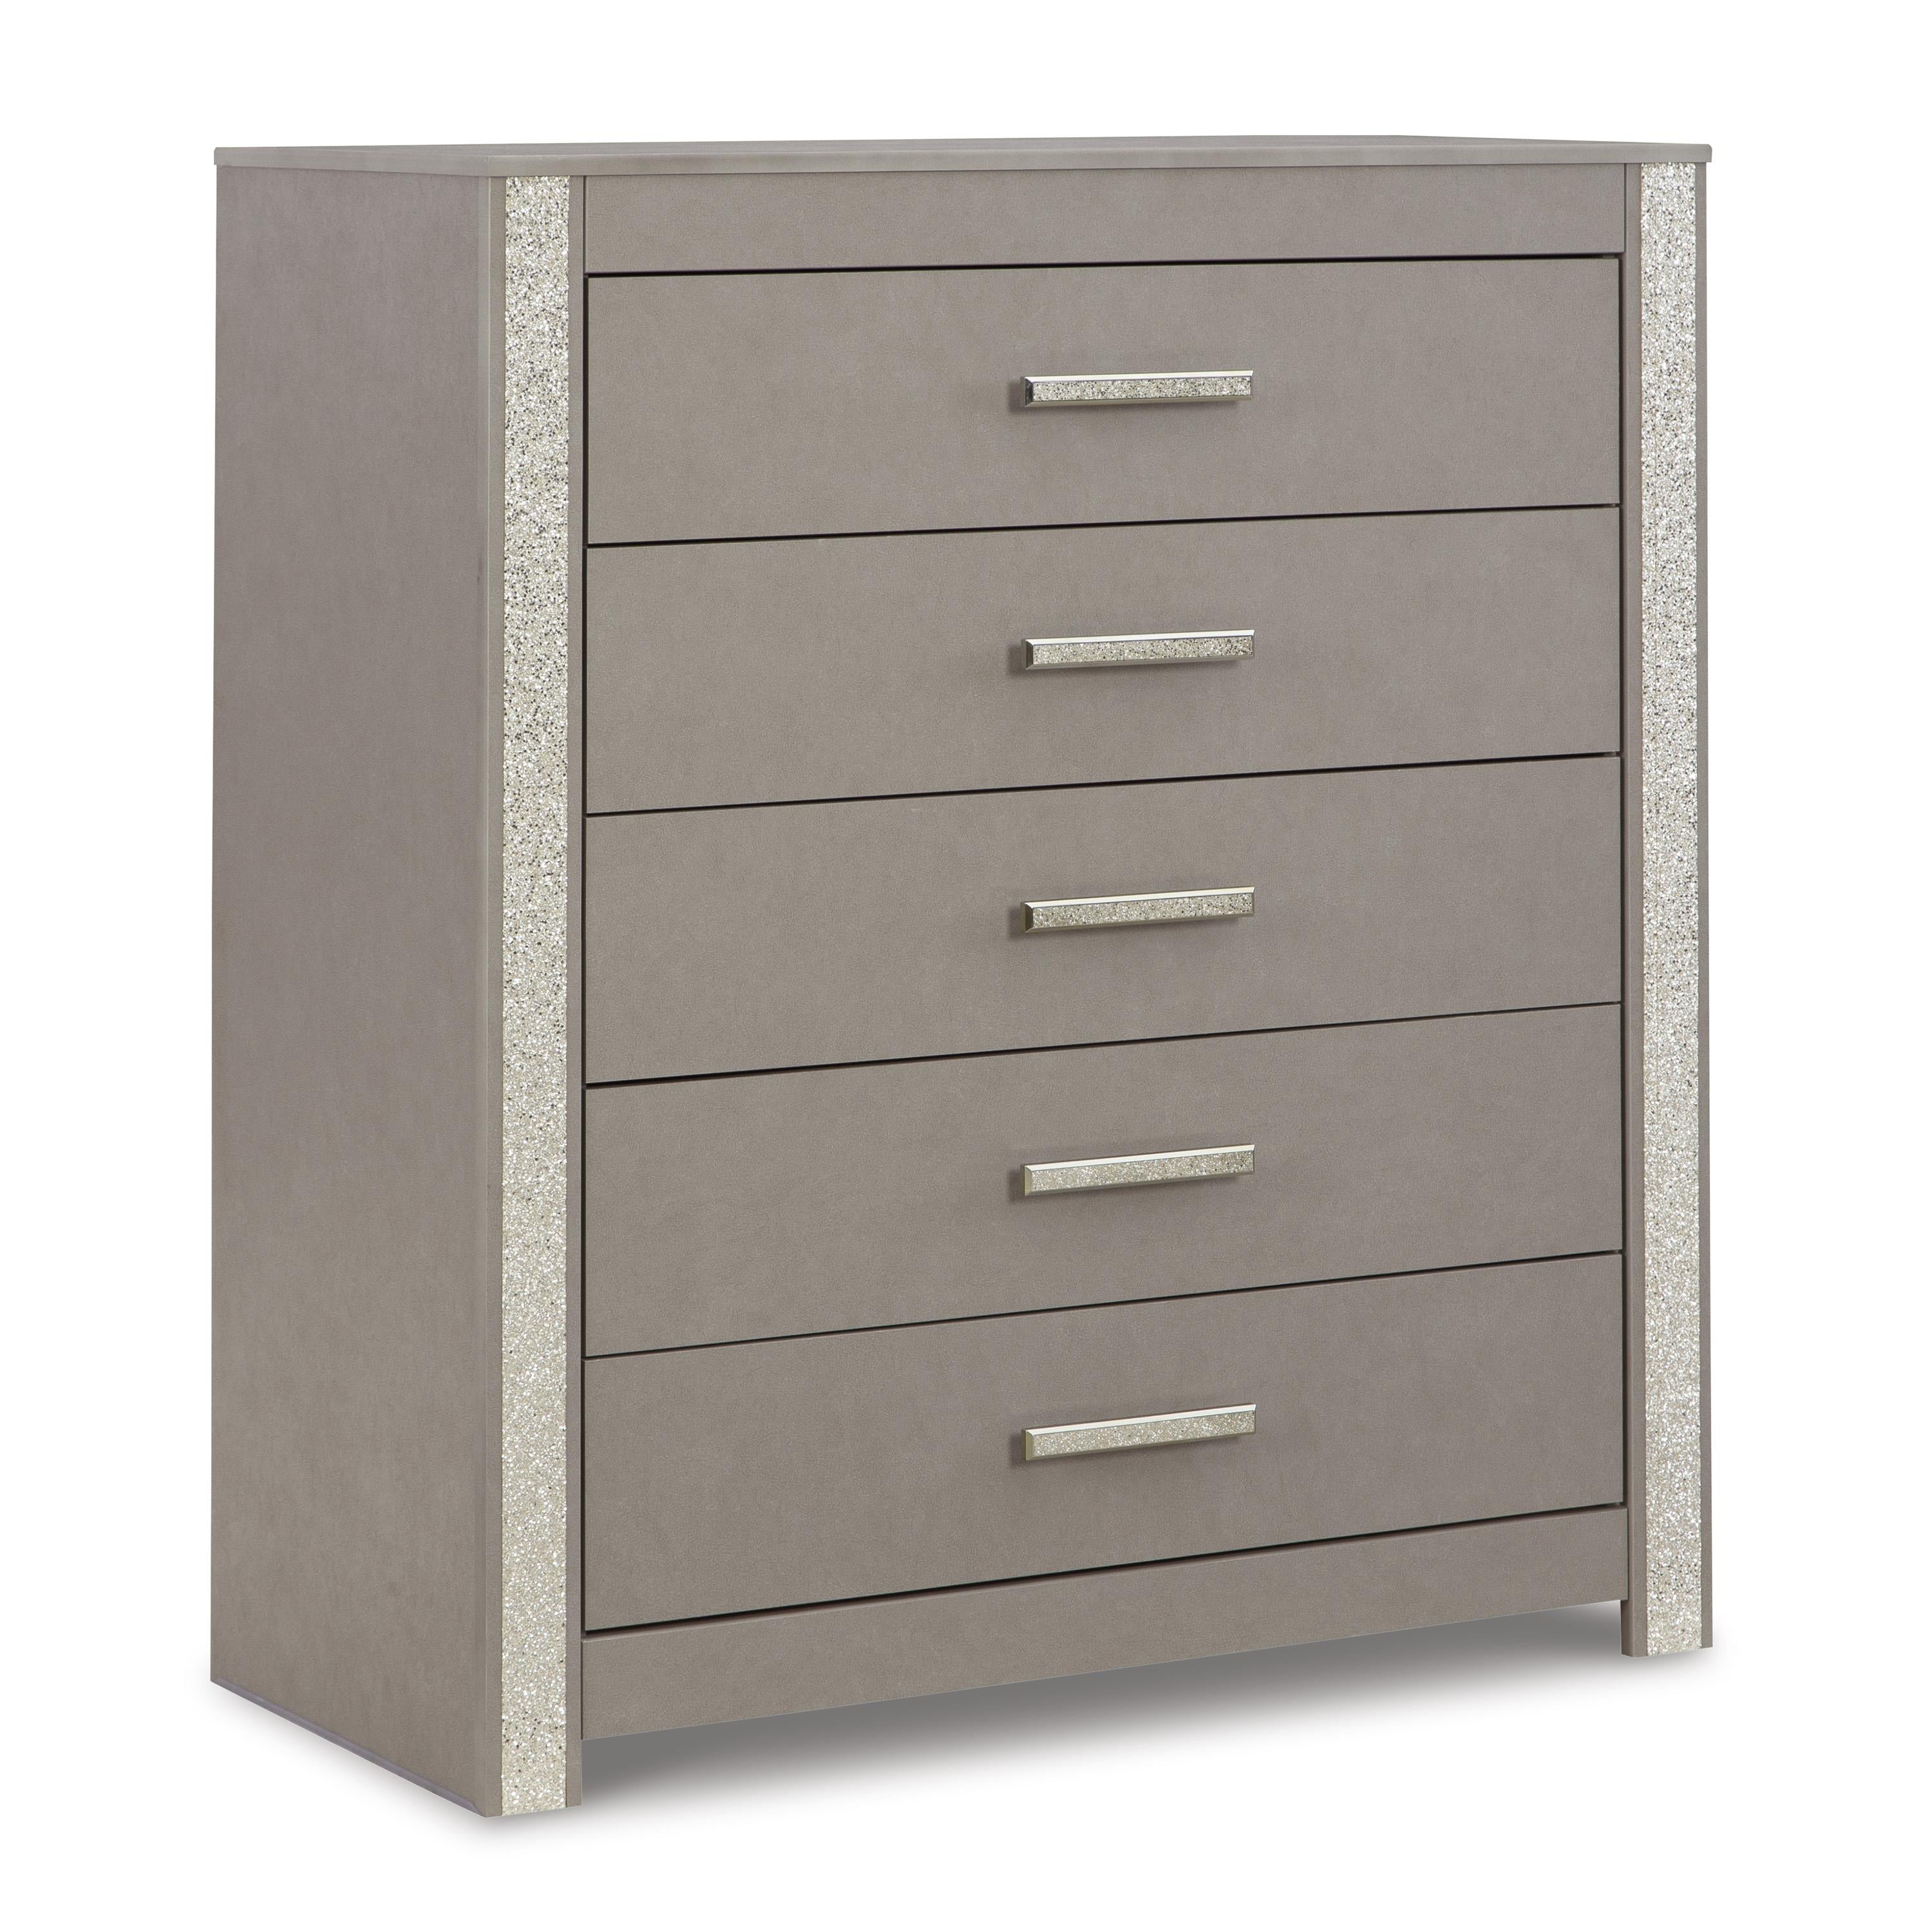 Signature Design by Ashley Surancha 5-Drawer Chest B1145-345 IMAGE 1